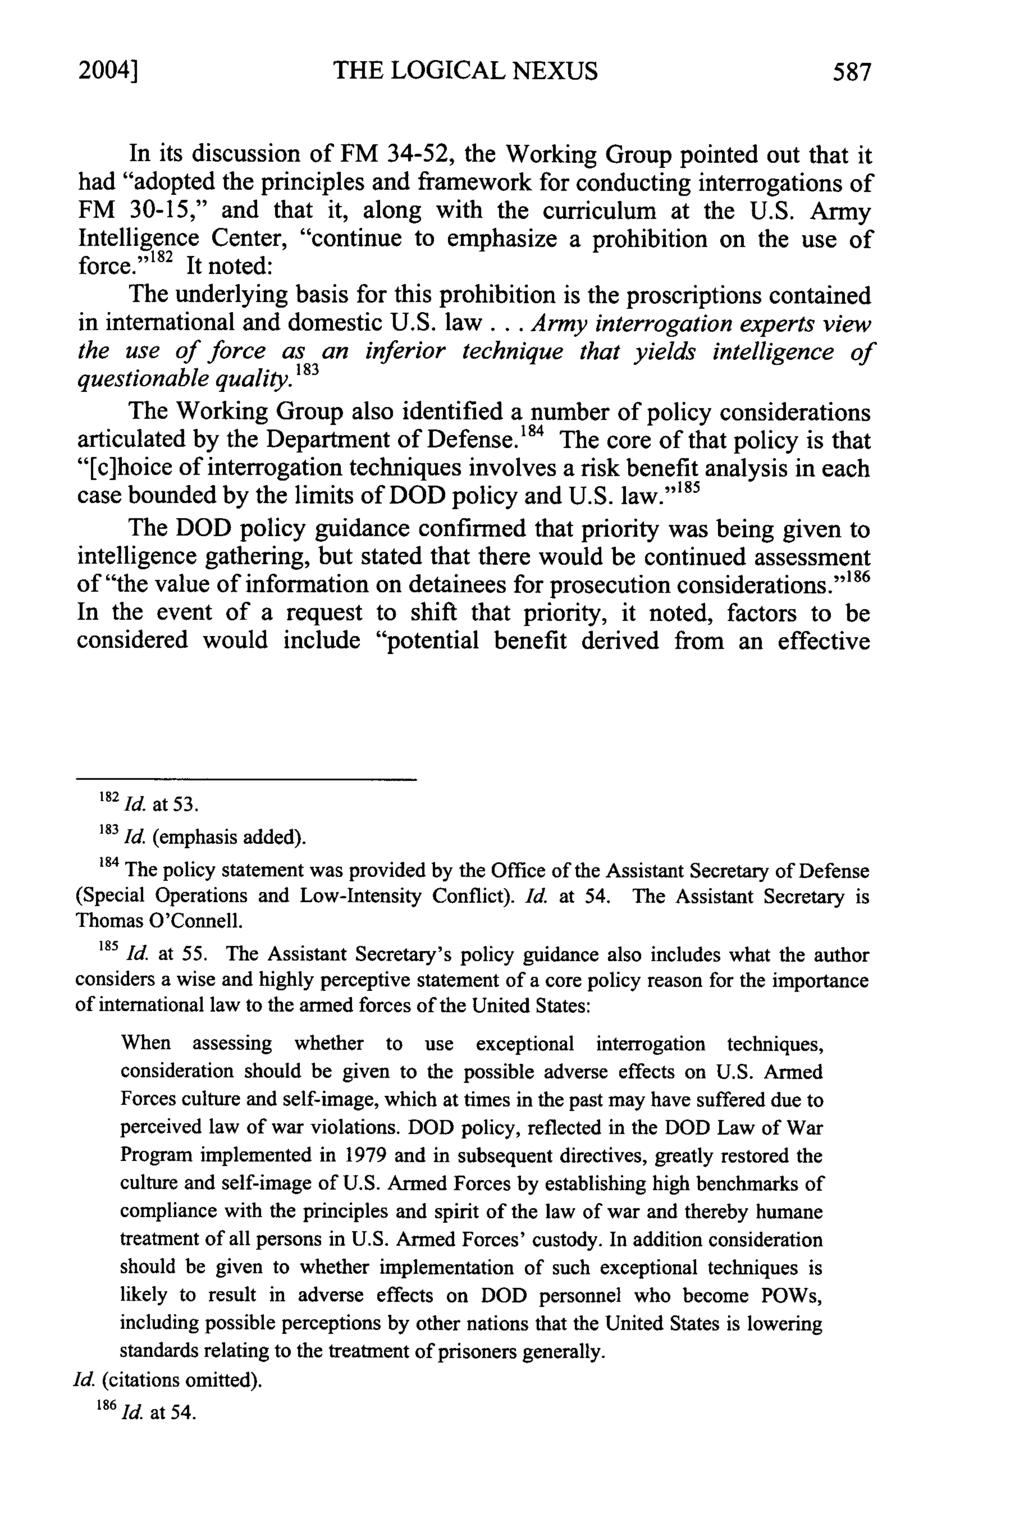 2004] THE LOGICAL NEXUS In its discussion of FM 34-52, the Working Group pointed out that it had "adopted the principles and framework for conducting interrogations of FM 30-15," and that it, along